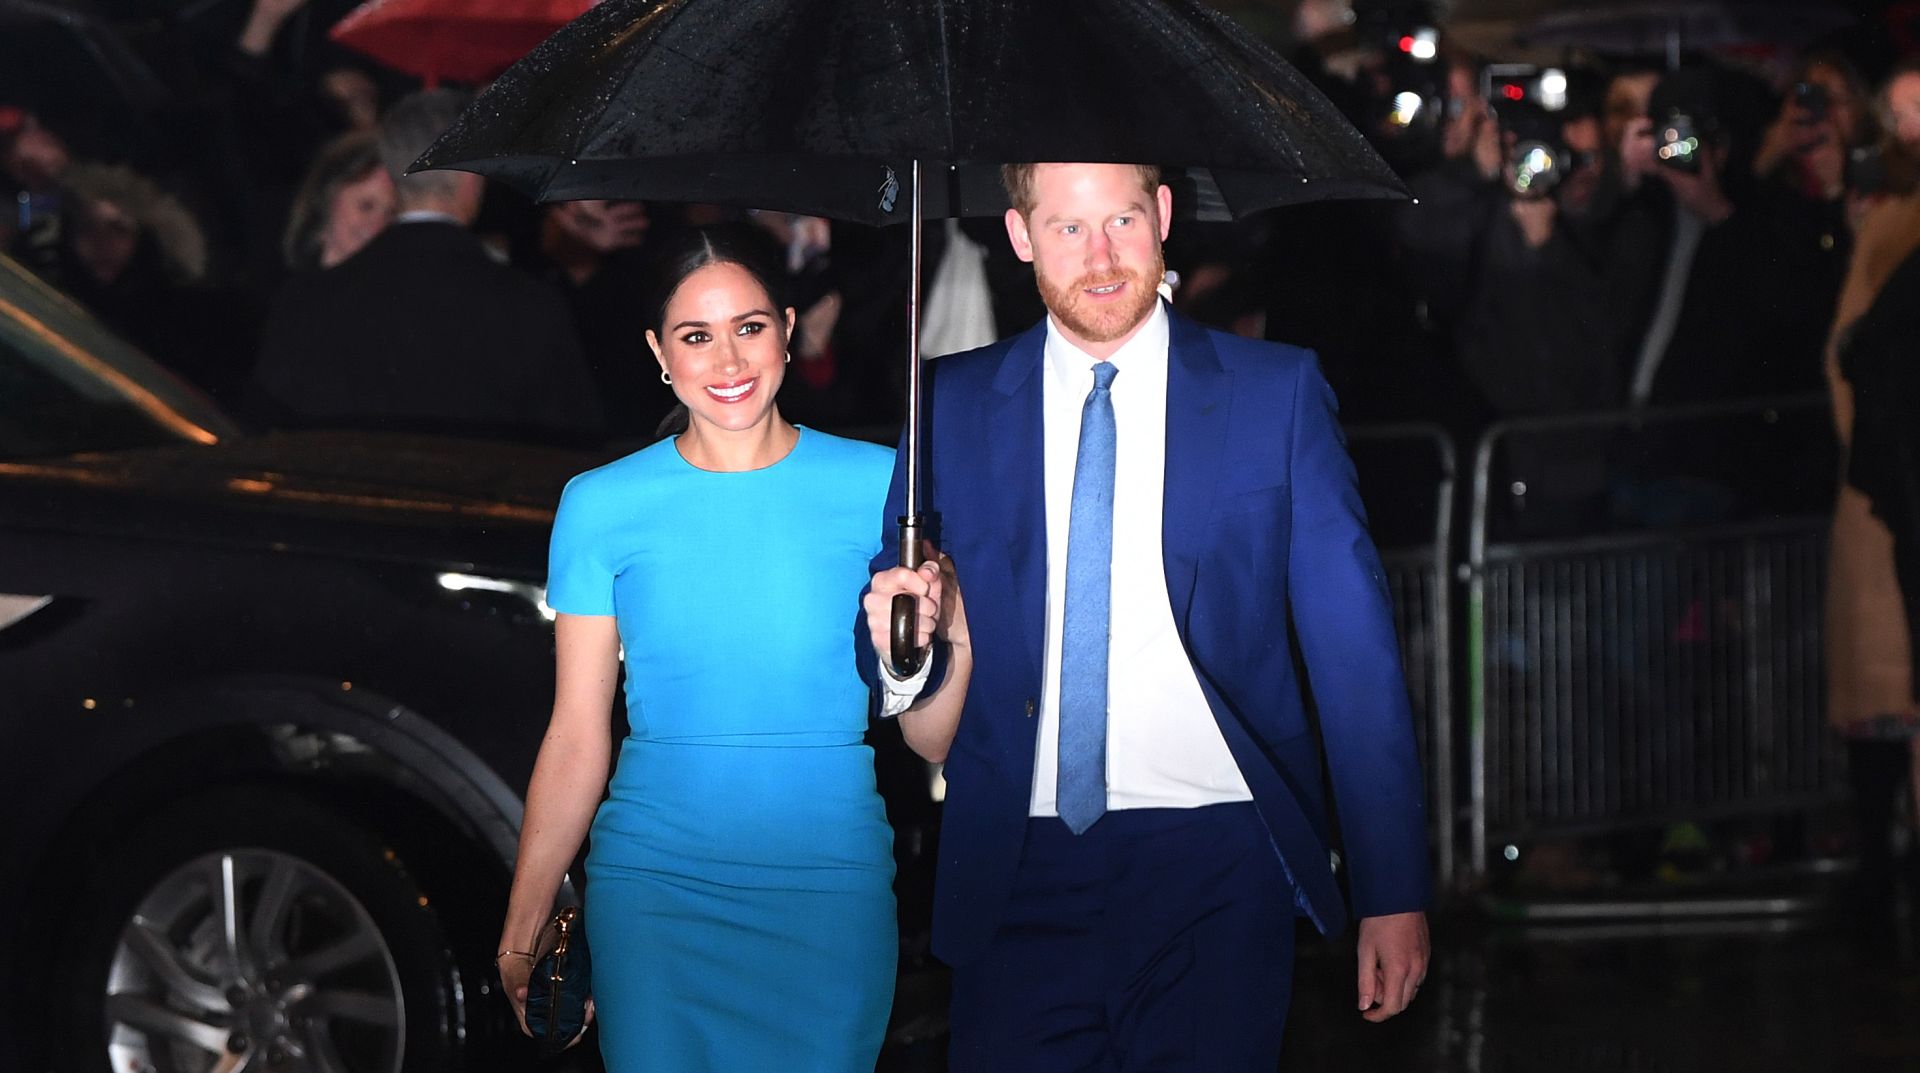 epa08643188 (FILE) - Britain's Harry (R) and Meghan (L) attend the annual Endeavour Fund Awards at Mansion House in London, Britain, 05 March 2020 (reissued 03 September 2020). According to media reports, Harry and his wife Meghan signed a contract with streaming service Netflix. The couple will be producers of series about nature, documentaries and children's programs.  EPA/NEIL HALL *** Local Caption *** 55931109